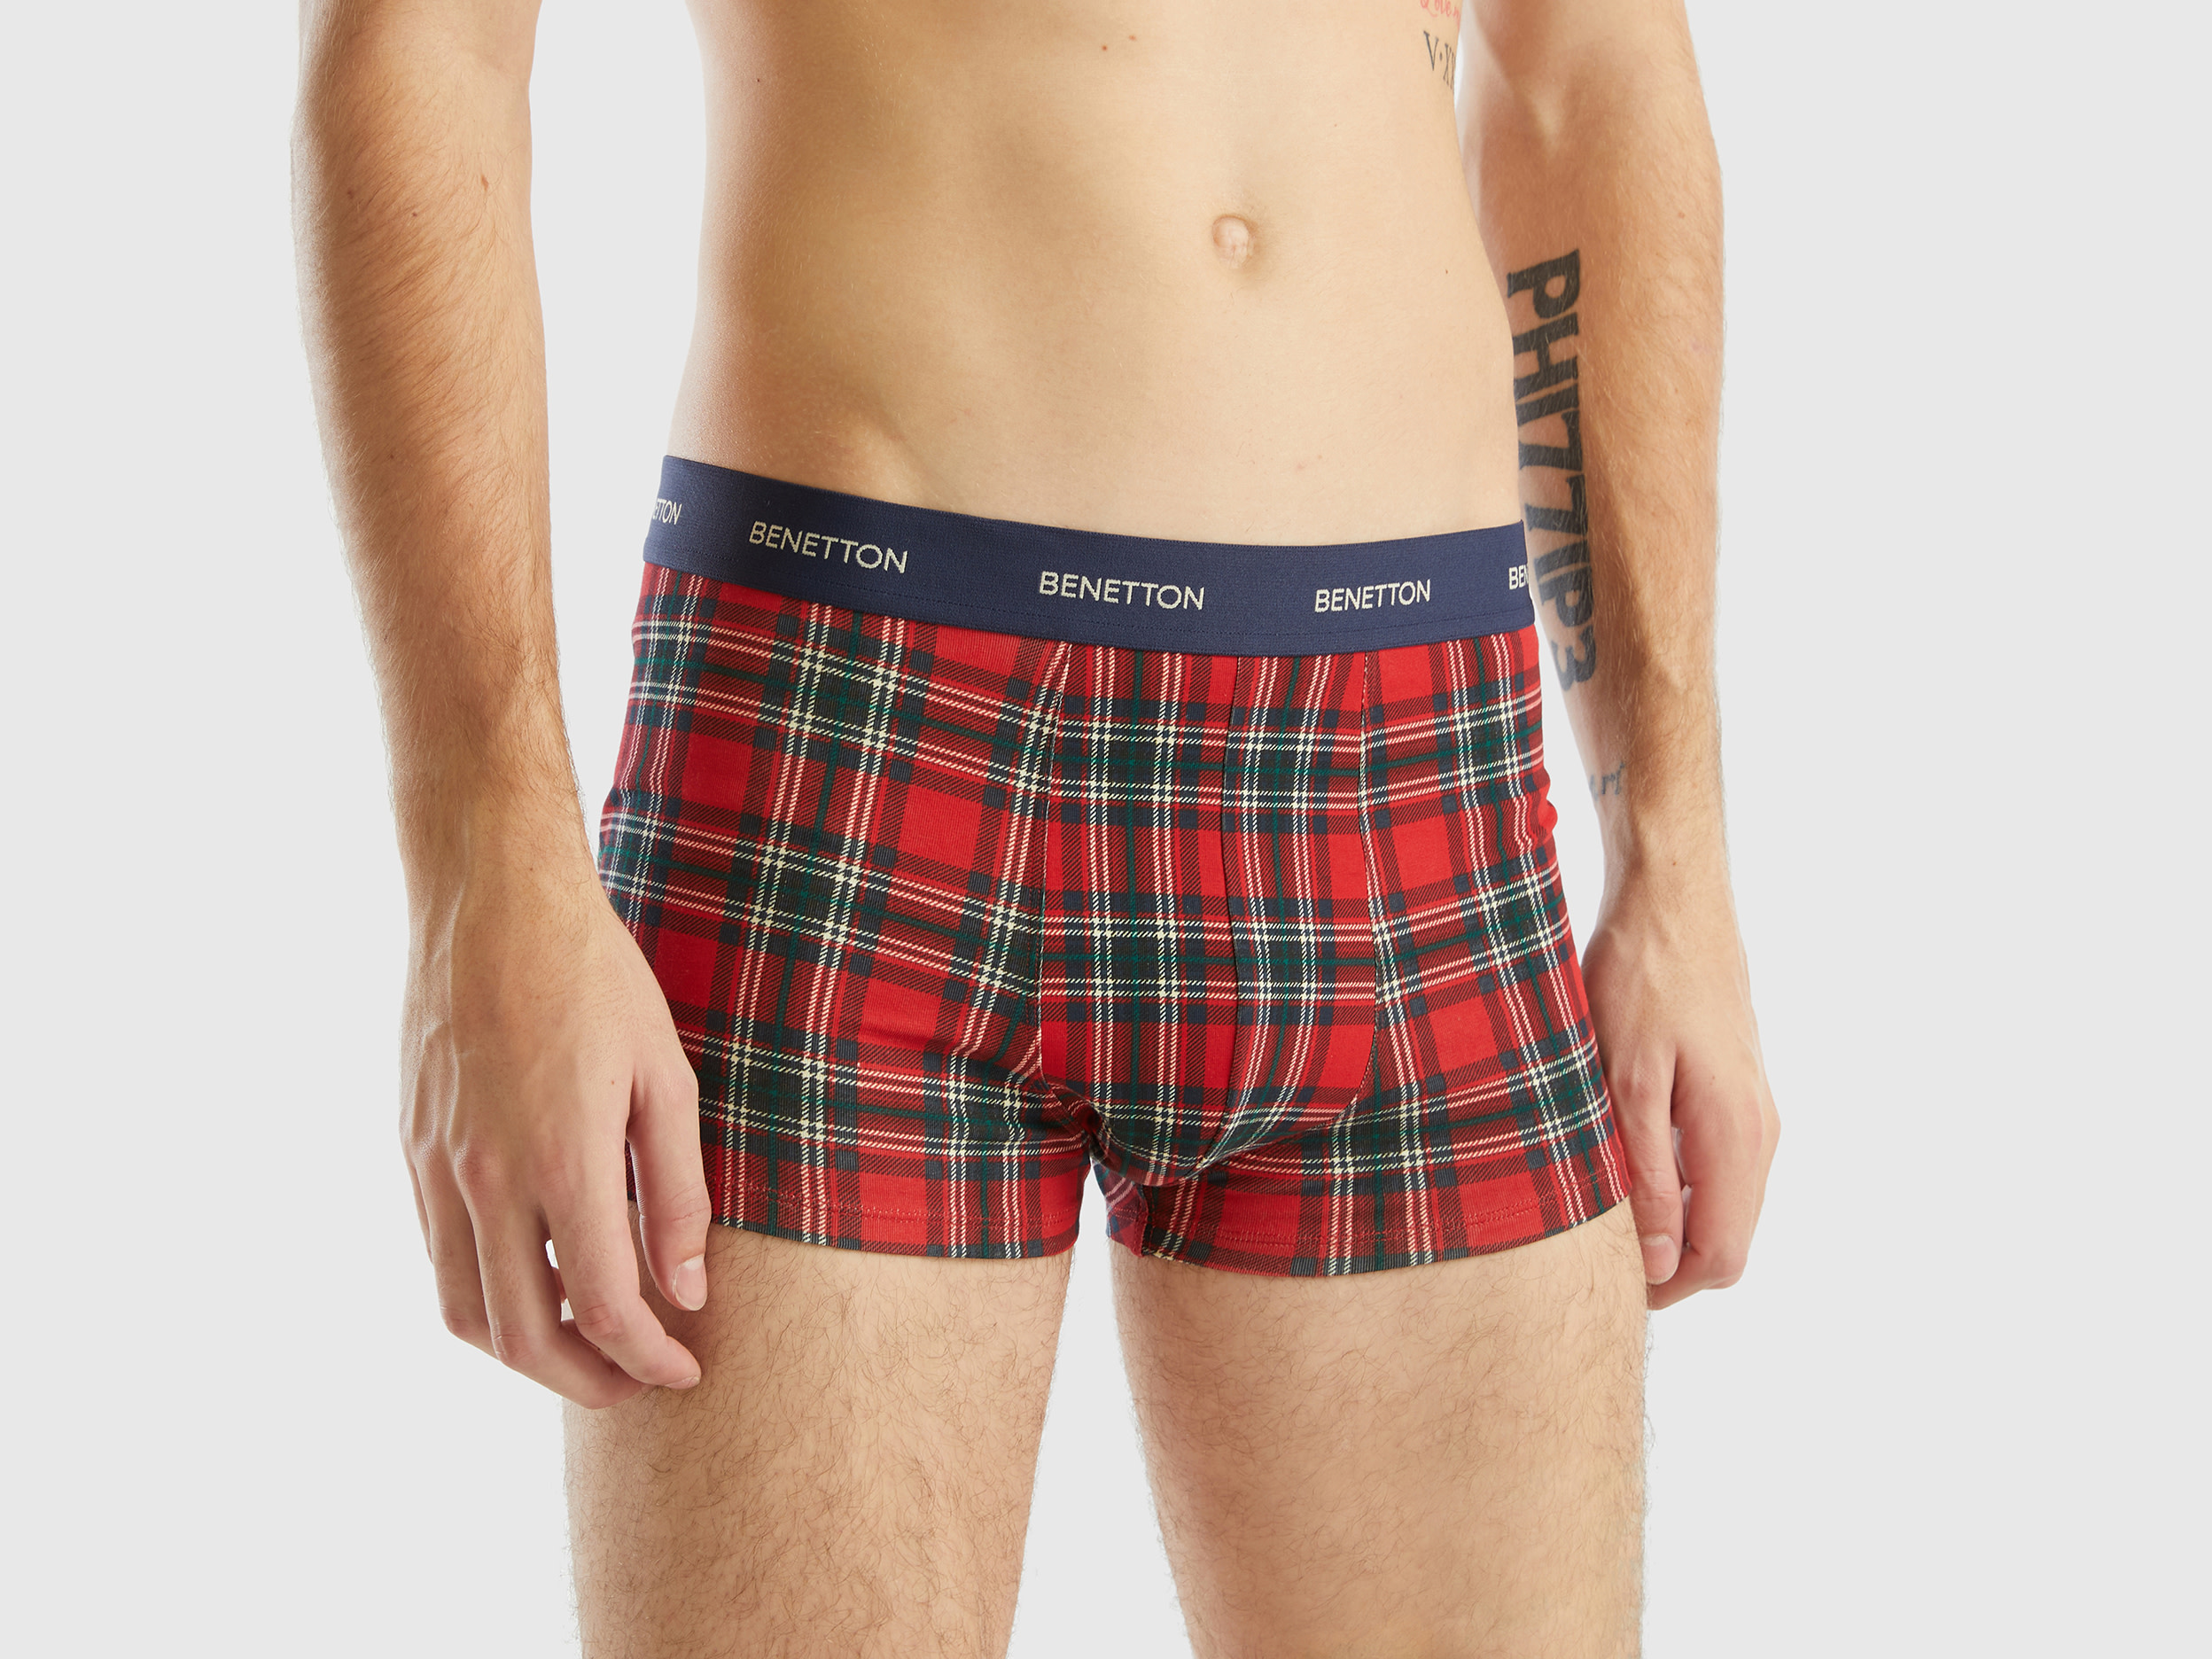 Benetton, Red And Blue Tartan Boxer Shorts, size S, Red, Men